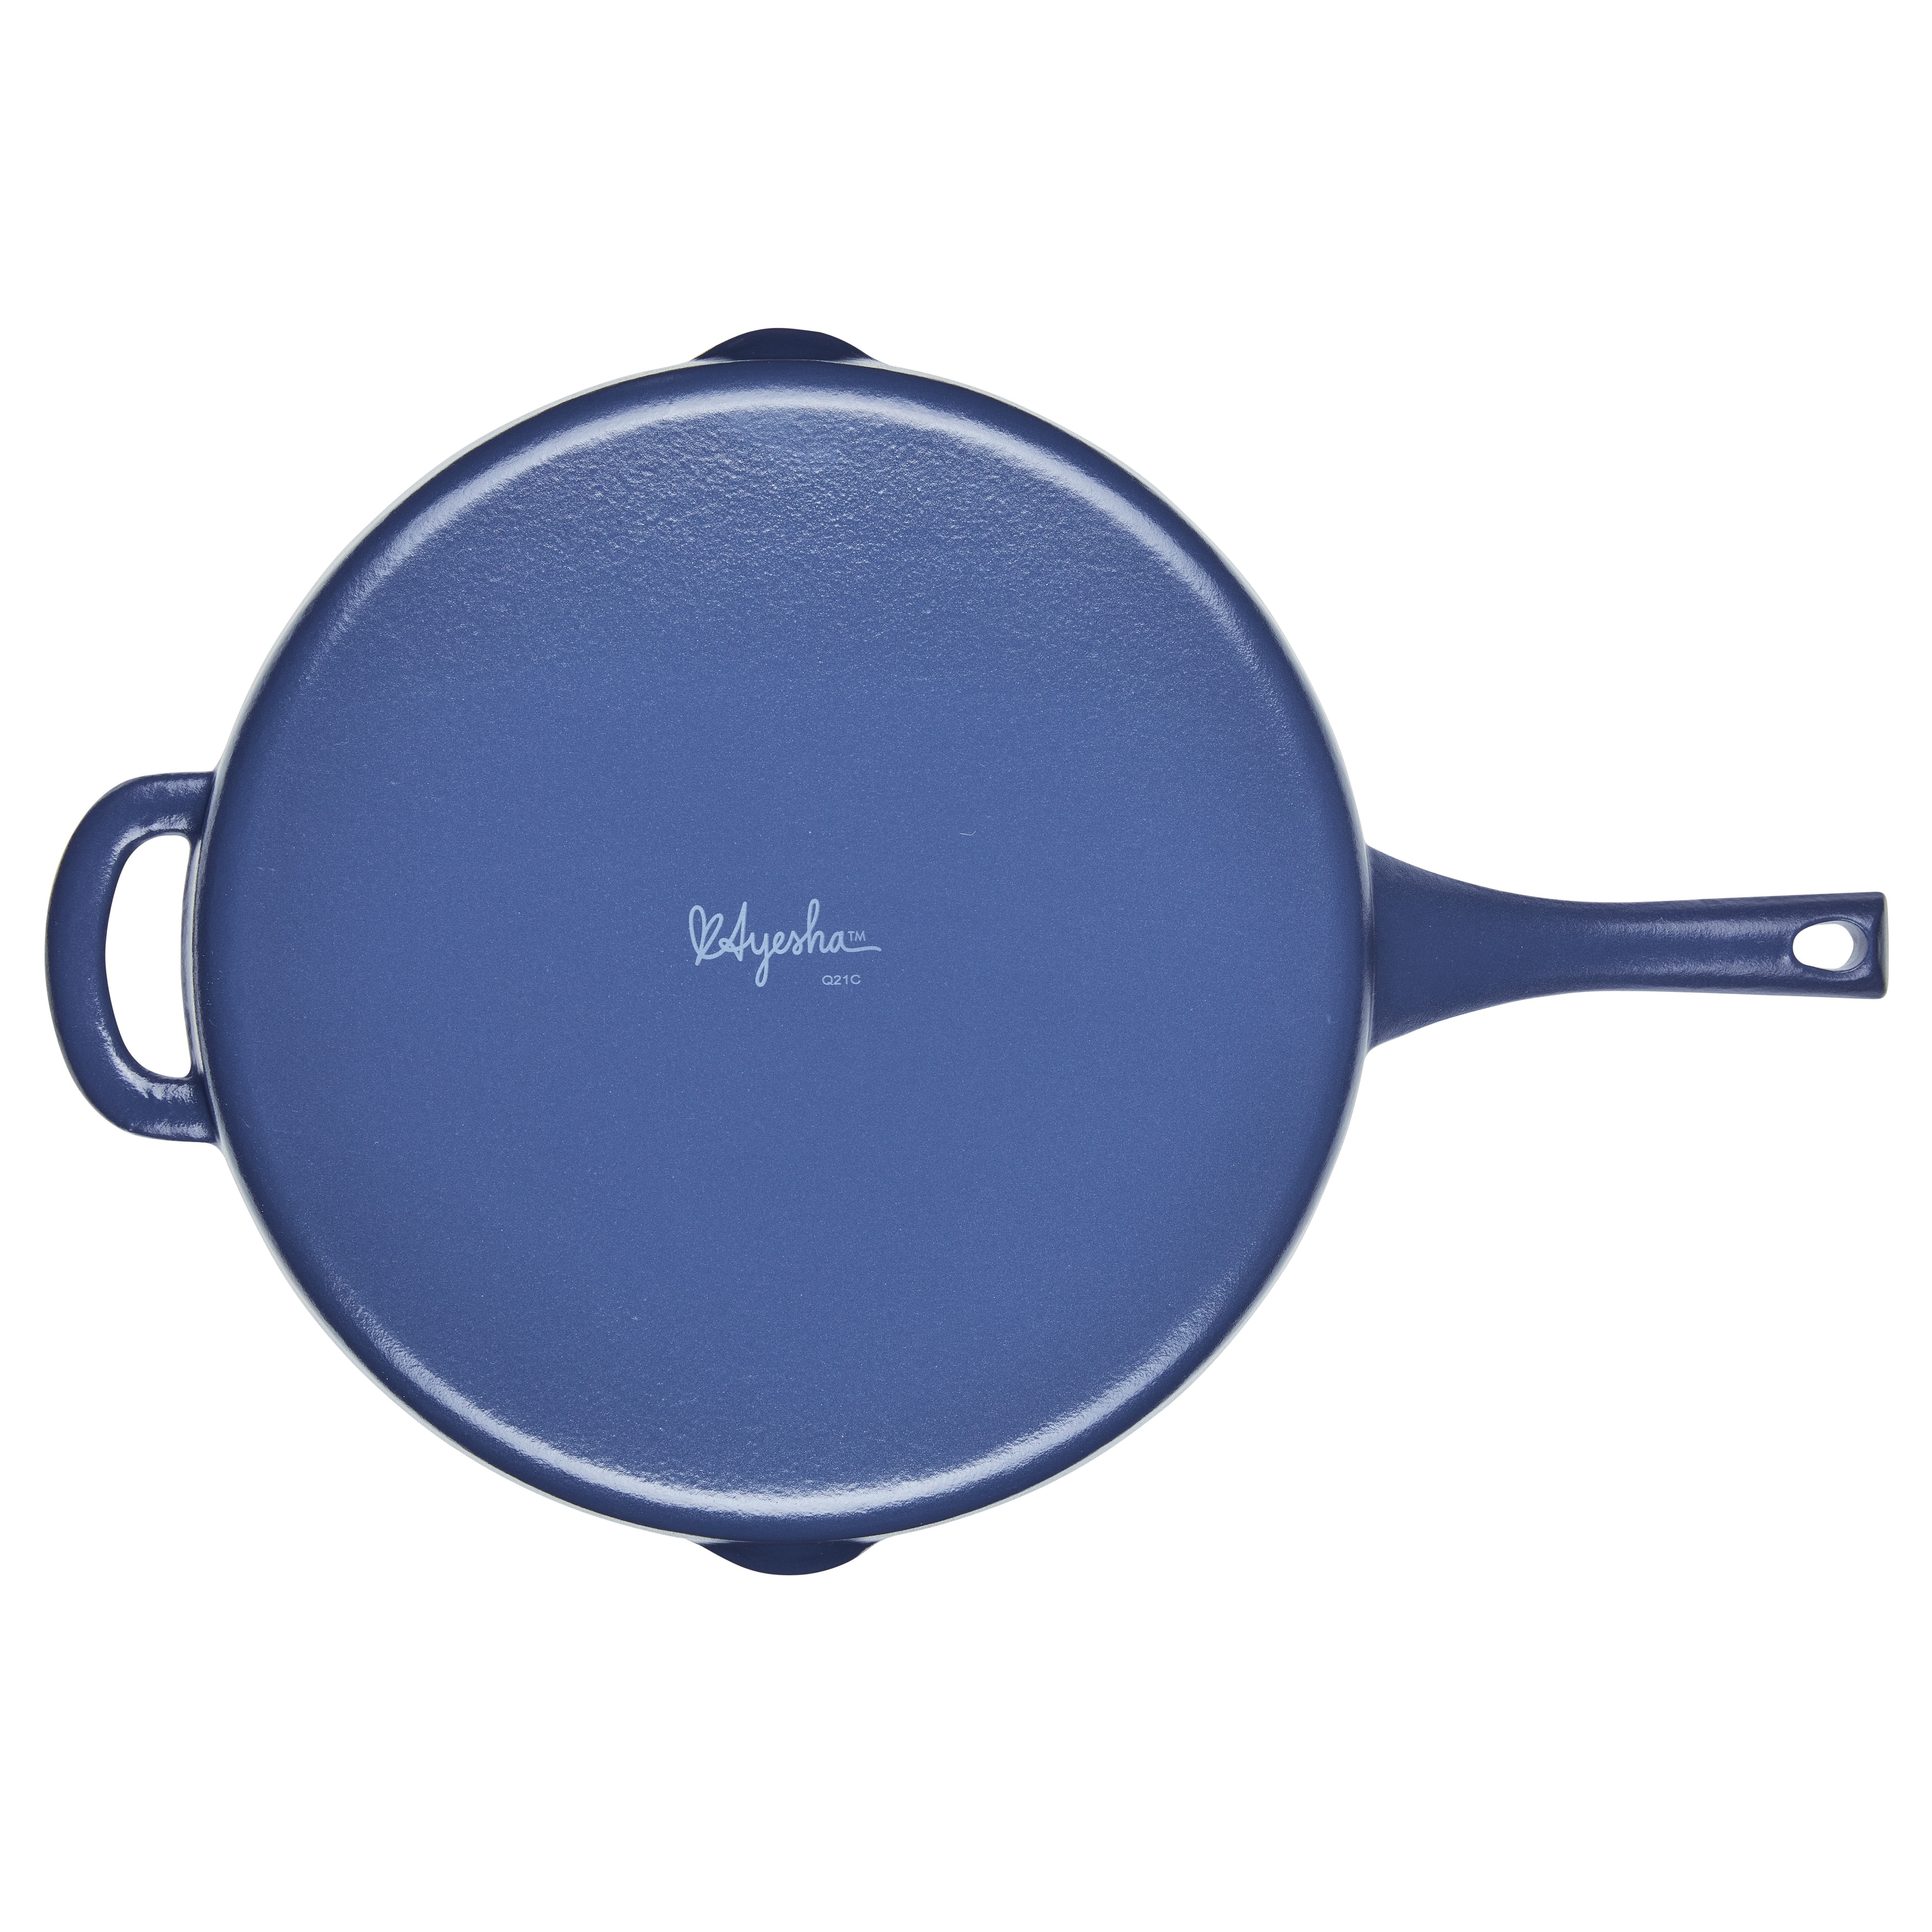 https://ak1.ostkcdn.com/images/products/is/images/direct/4db847c0b403fde6ce4a4e193a5c76c19aece545/Ayesha-Curry-Enameled-Cast-Iron-Induction-Skillet-with-Helper-Handle-and-Pour-Spouts%2C-12-Inch%2C-Anchor-Blue.jpg